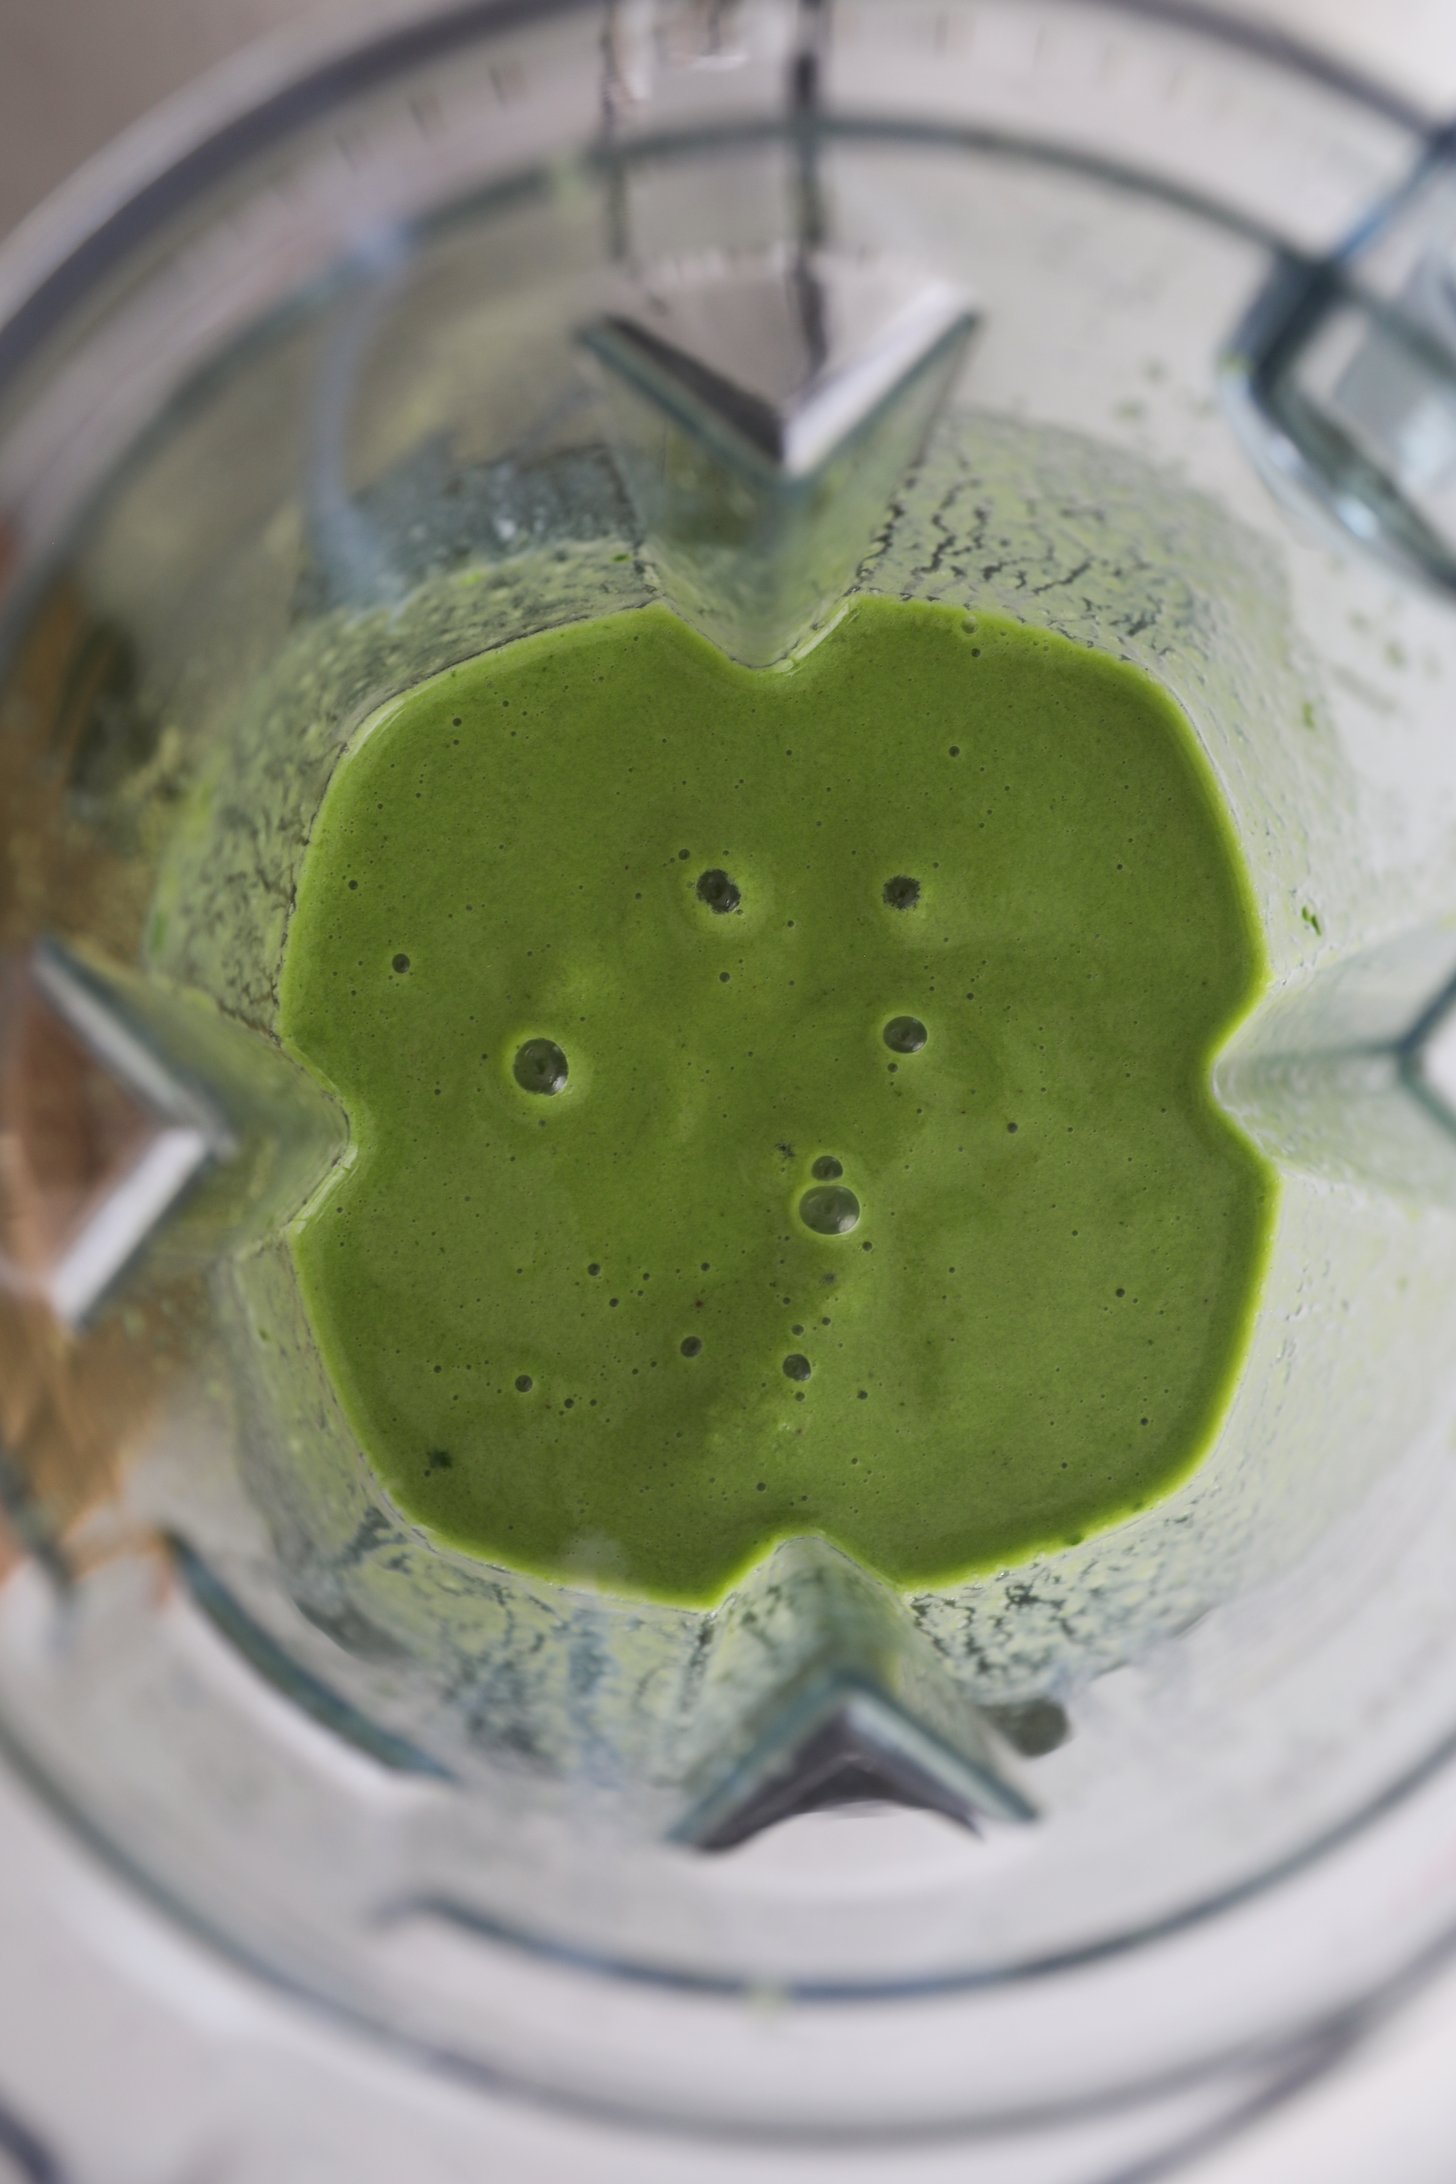 Overhead image of a blender with a green shake with bubbles.